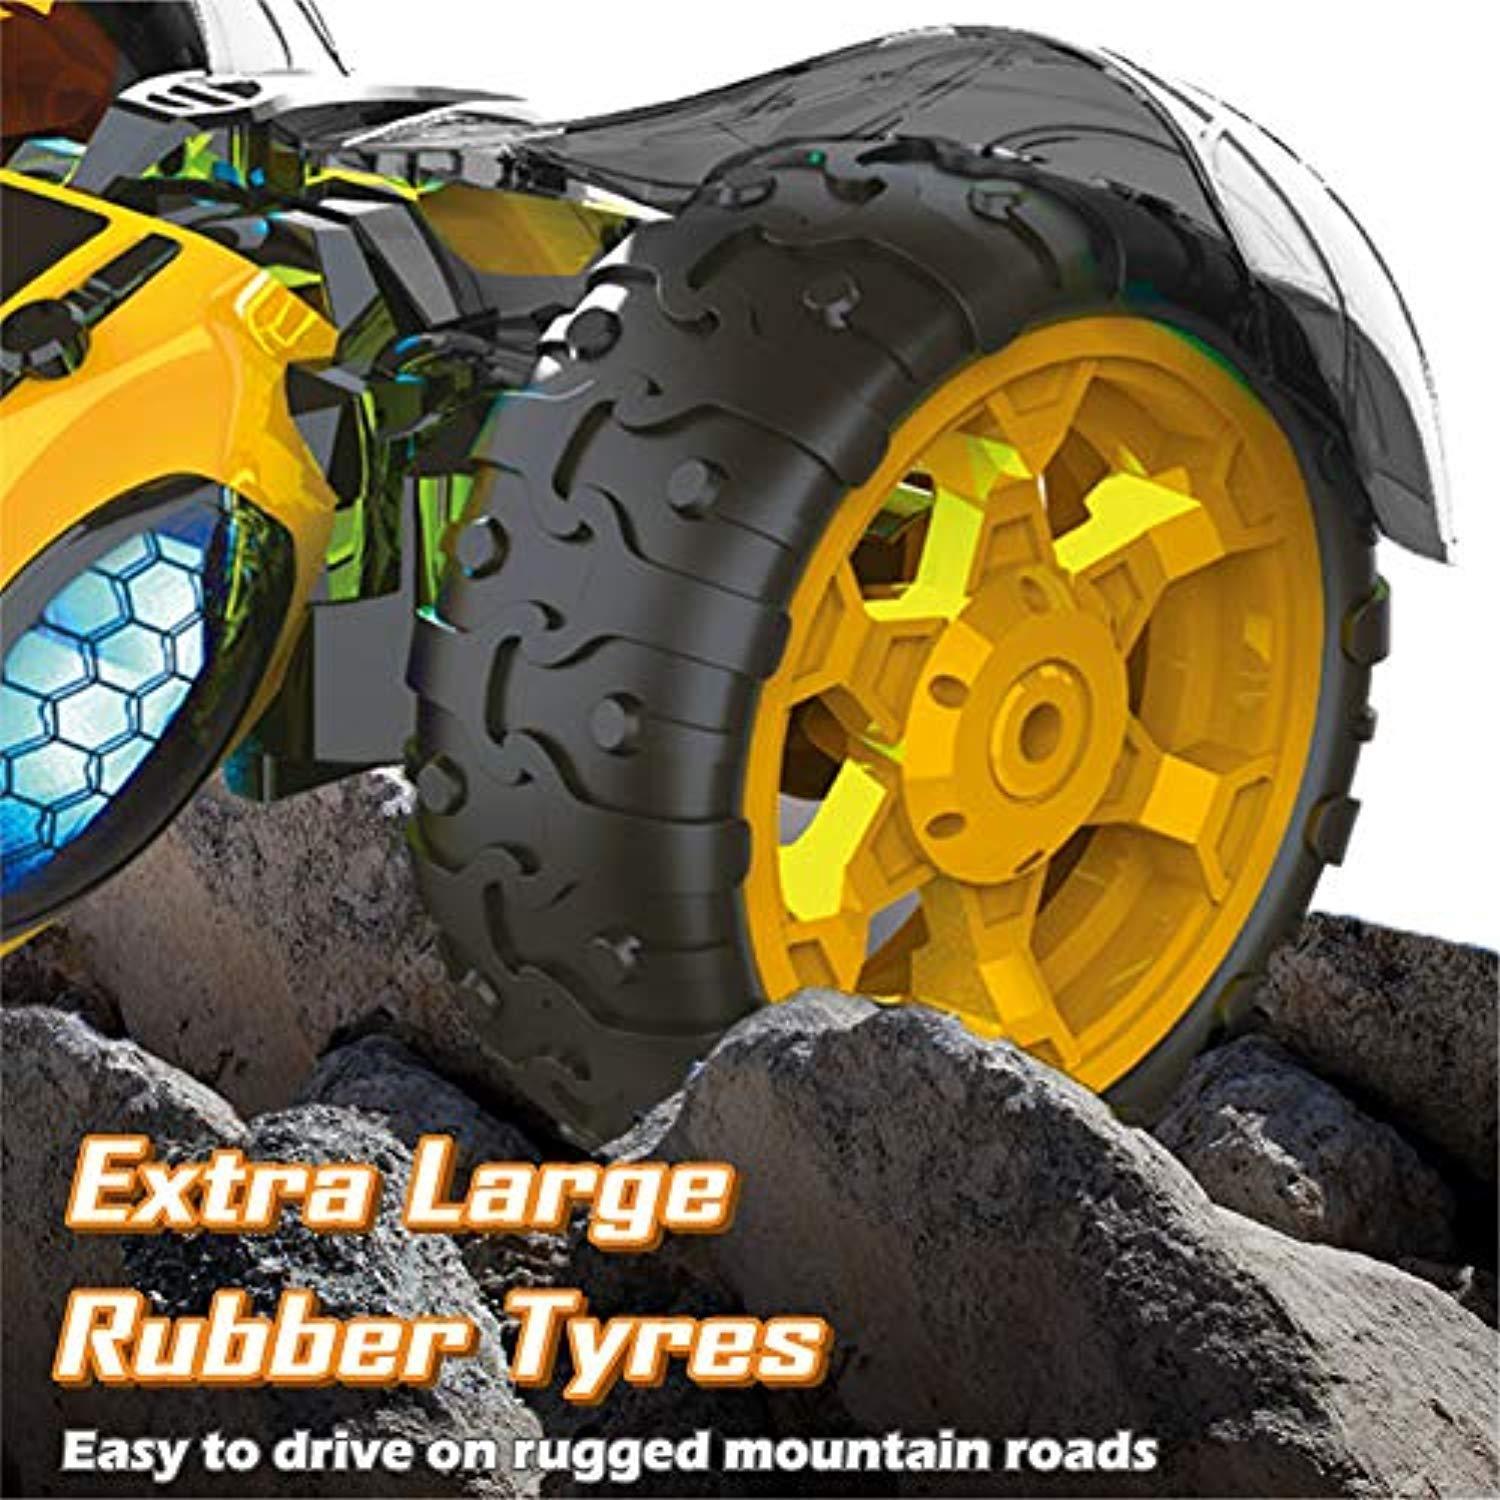 extra large remote control cars